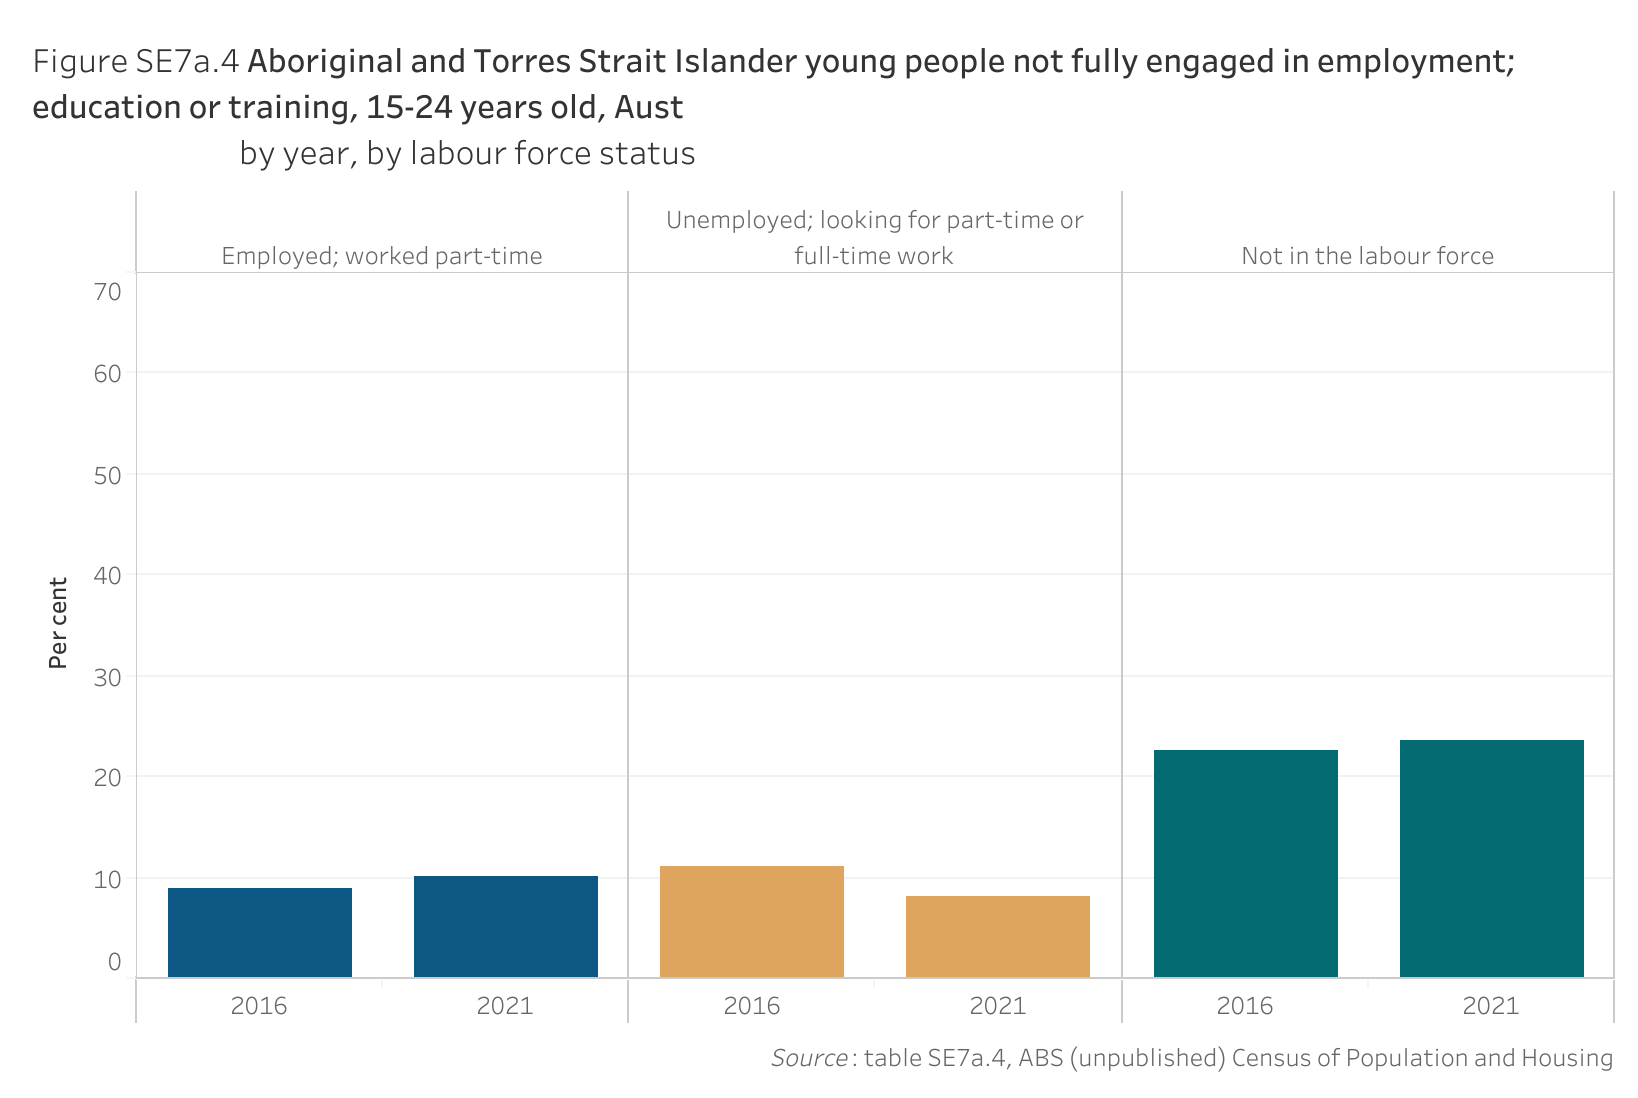 Figure SE7a.4 shows the Aboriginal and Torres Strait Islander young people not fully engaged in employment; education or training, 15-24 years old, Australia, by year, by labour force status. More details can be found within the text near this image.